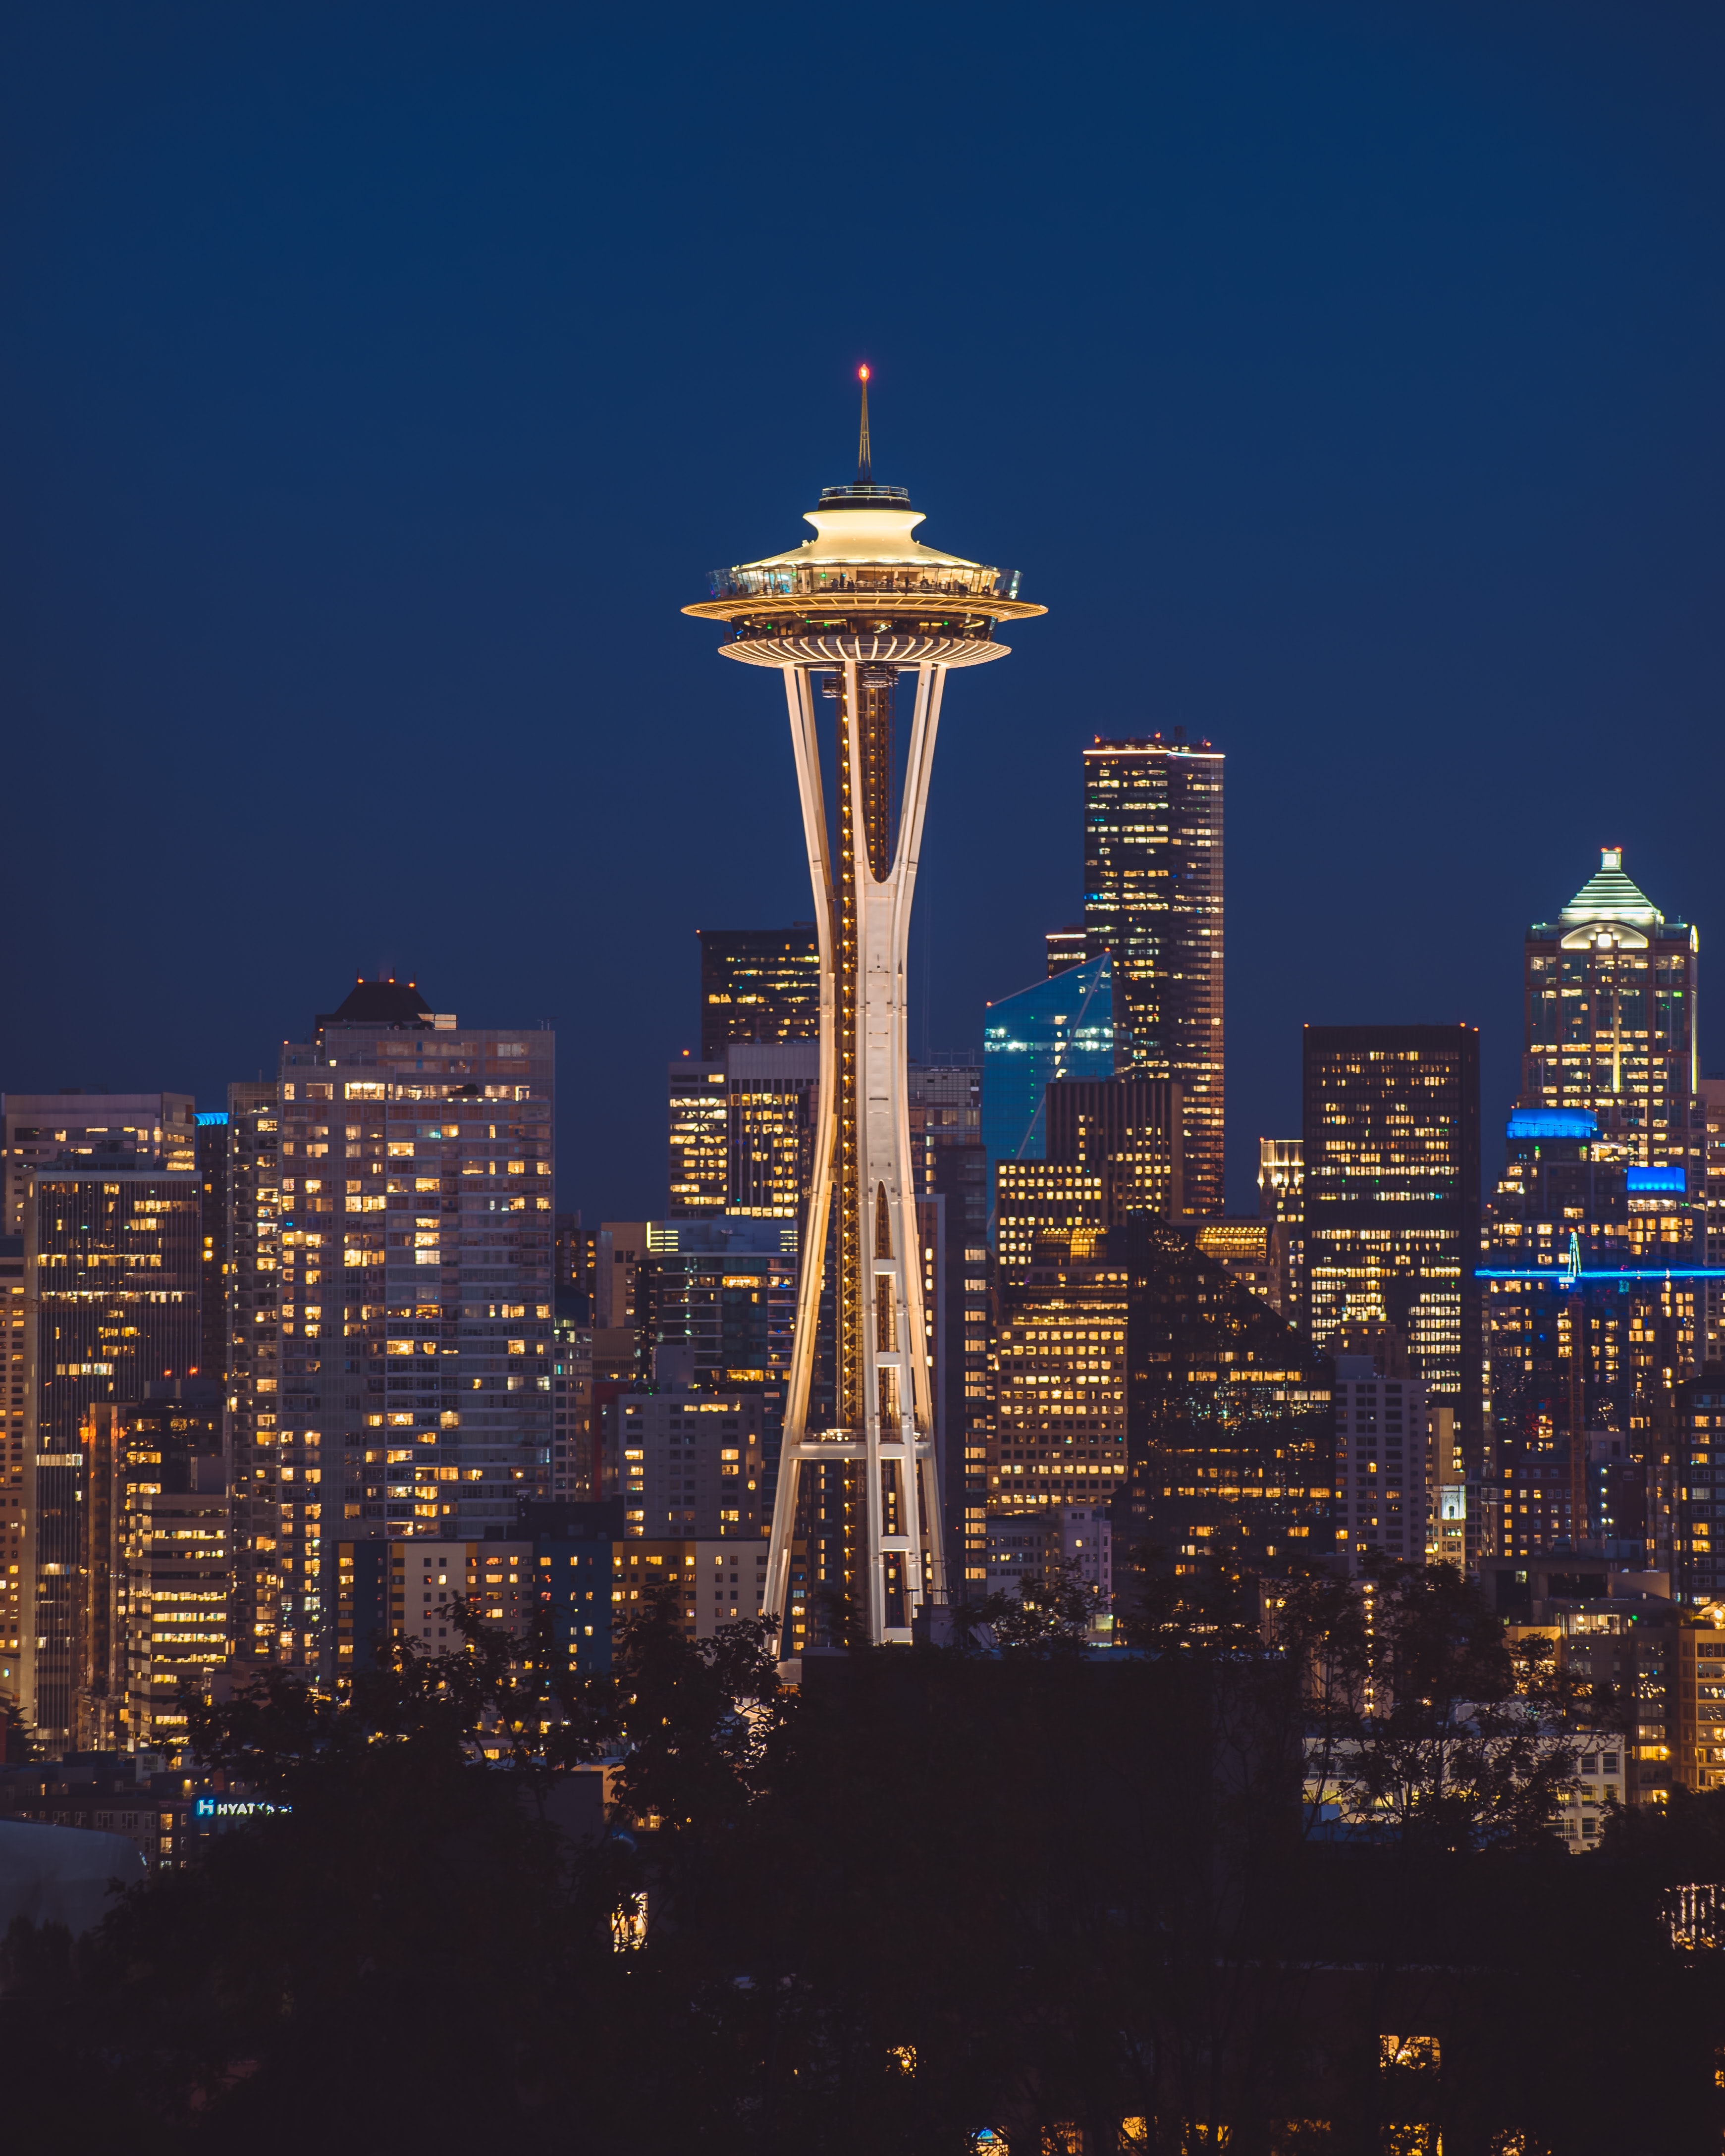 tower, night city, architecture, cities, usa, building, skyscrapers, united states, seattle